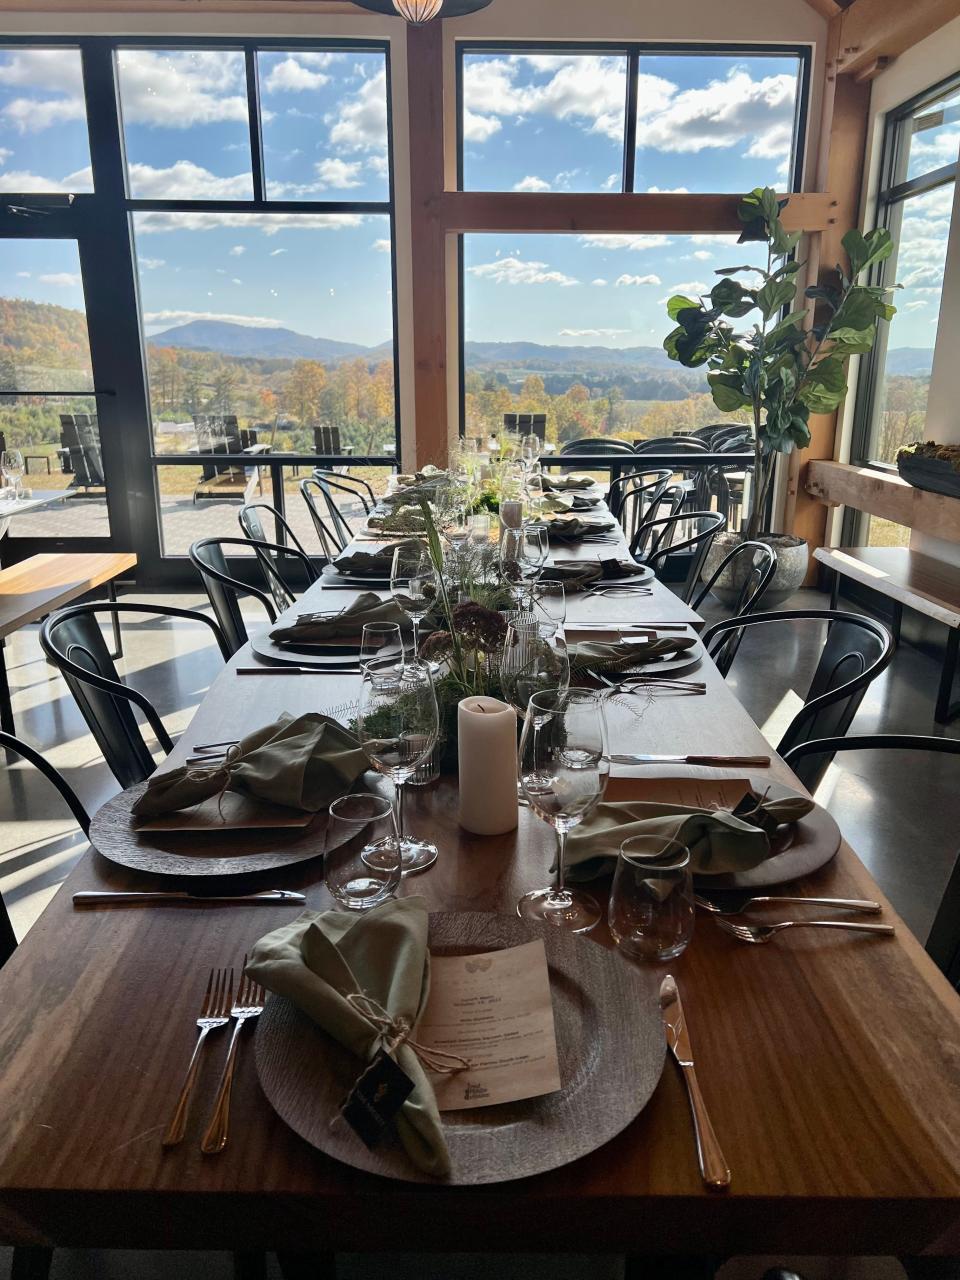 Red Fiddle Vittles will host Vintners Dinner at Stone Ashe Vineyard at 6:30 p.m. July 29 at 736 Green Mountain Road in Hendersonville.